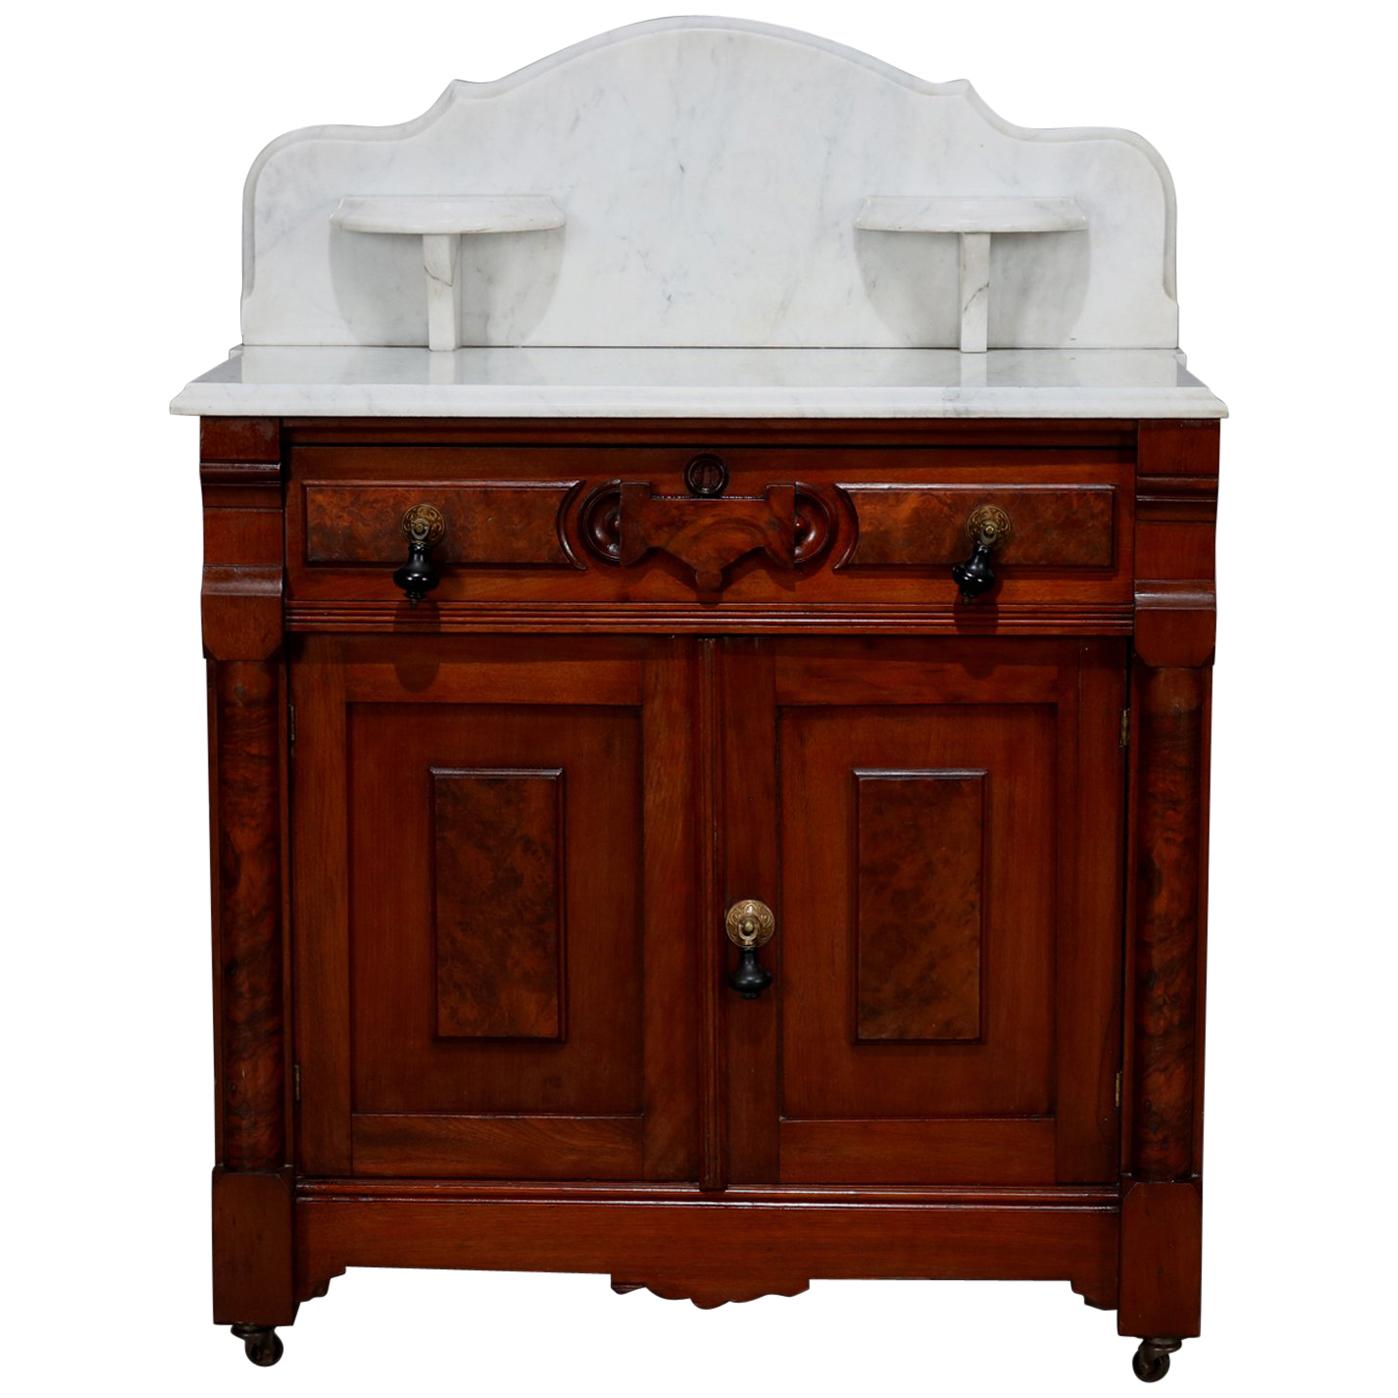 Antique Renaissance Revival Walnut and Burl Marble Top Wash Stand Cabinet